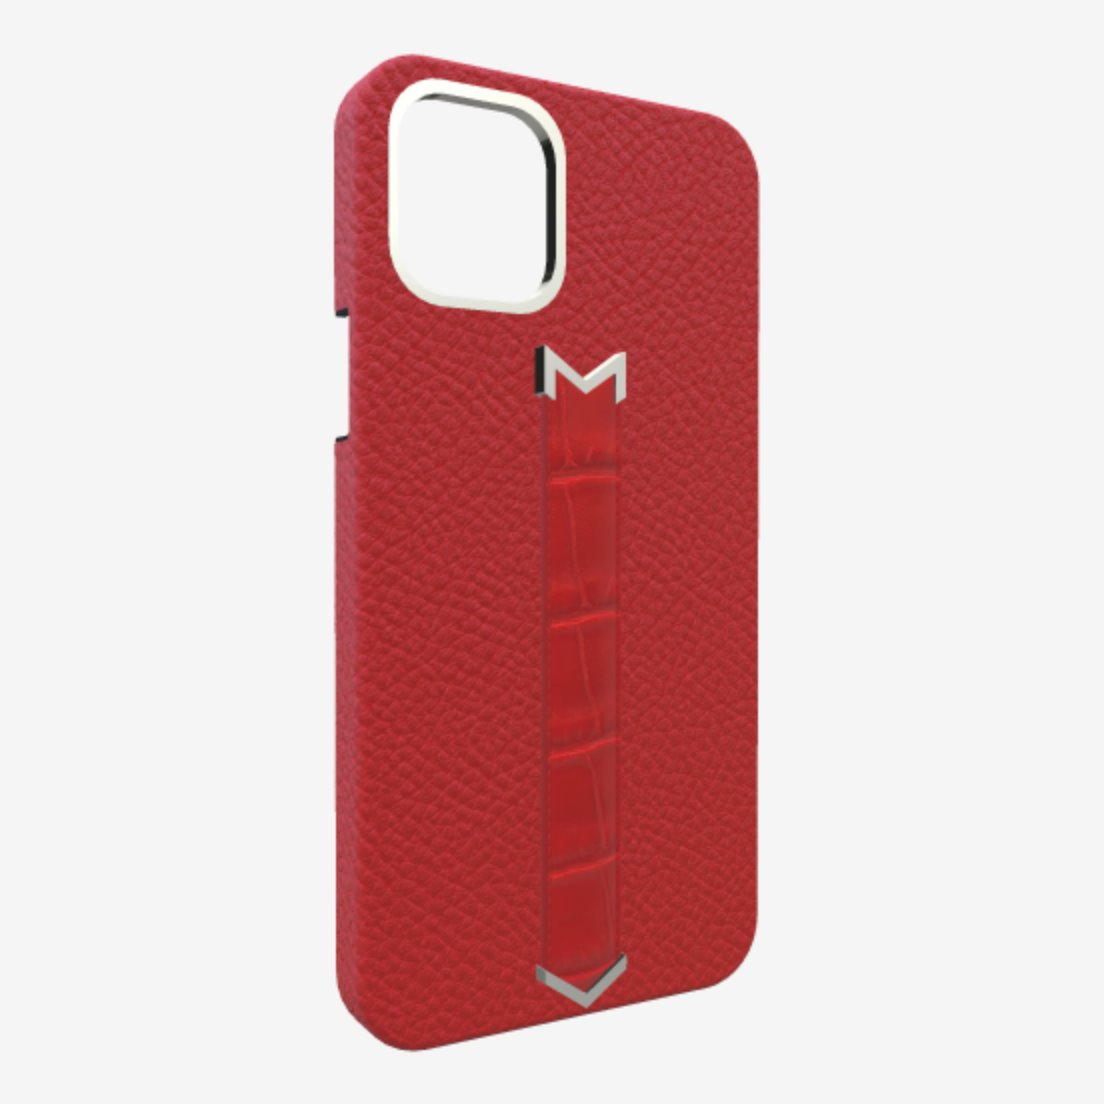 Silver Finger Strap Case for iPhone 13 in Genuine Calfskin and Alligator Glamour-Red Glamour-Red 